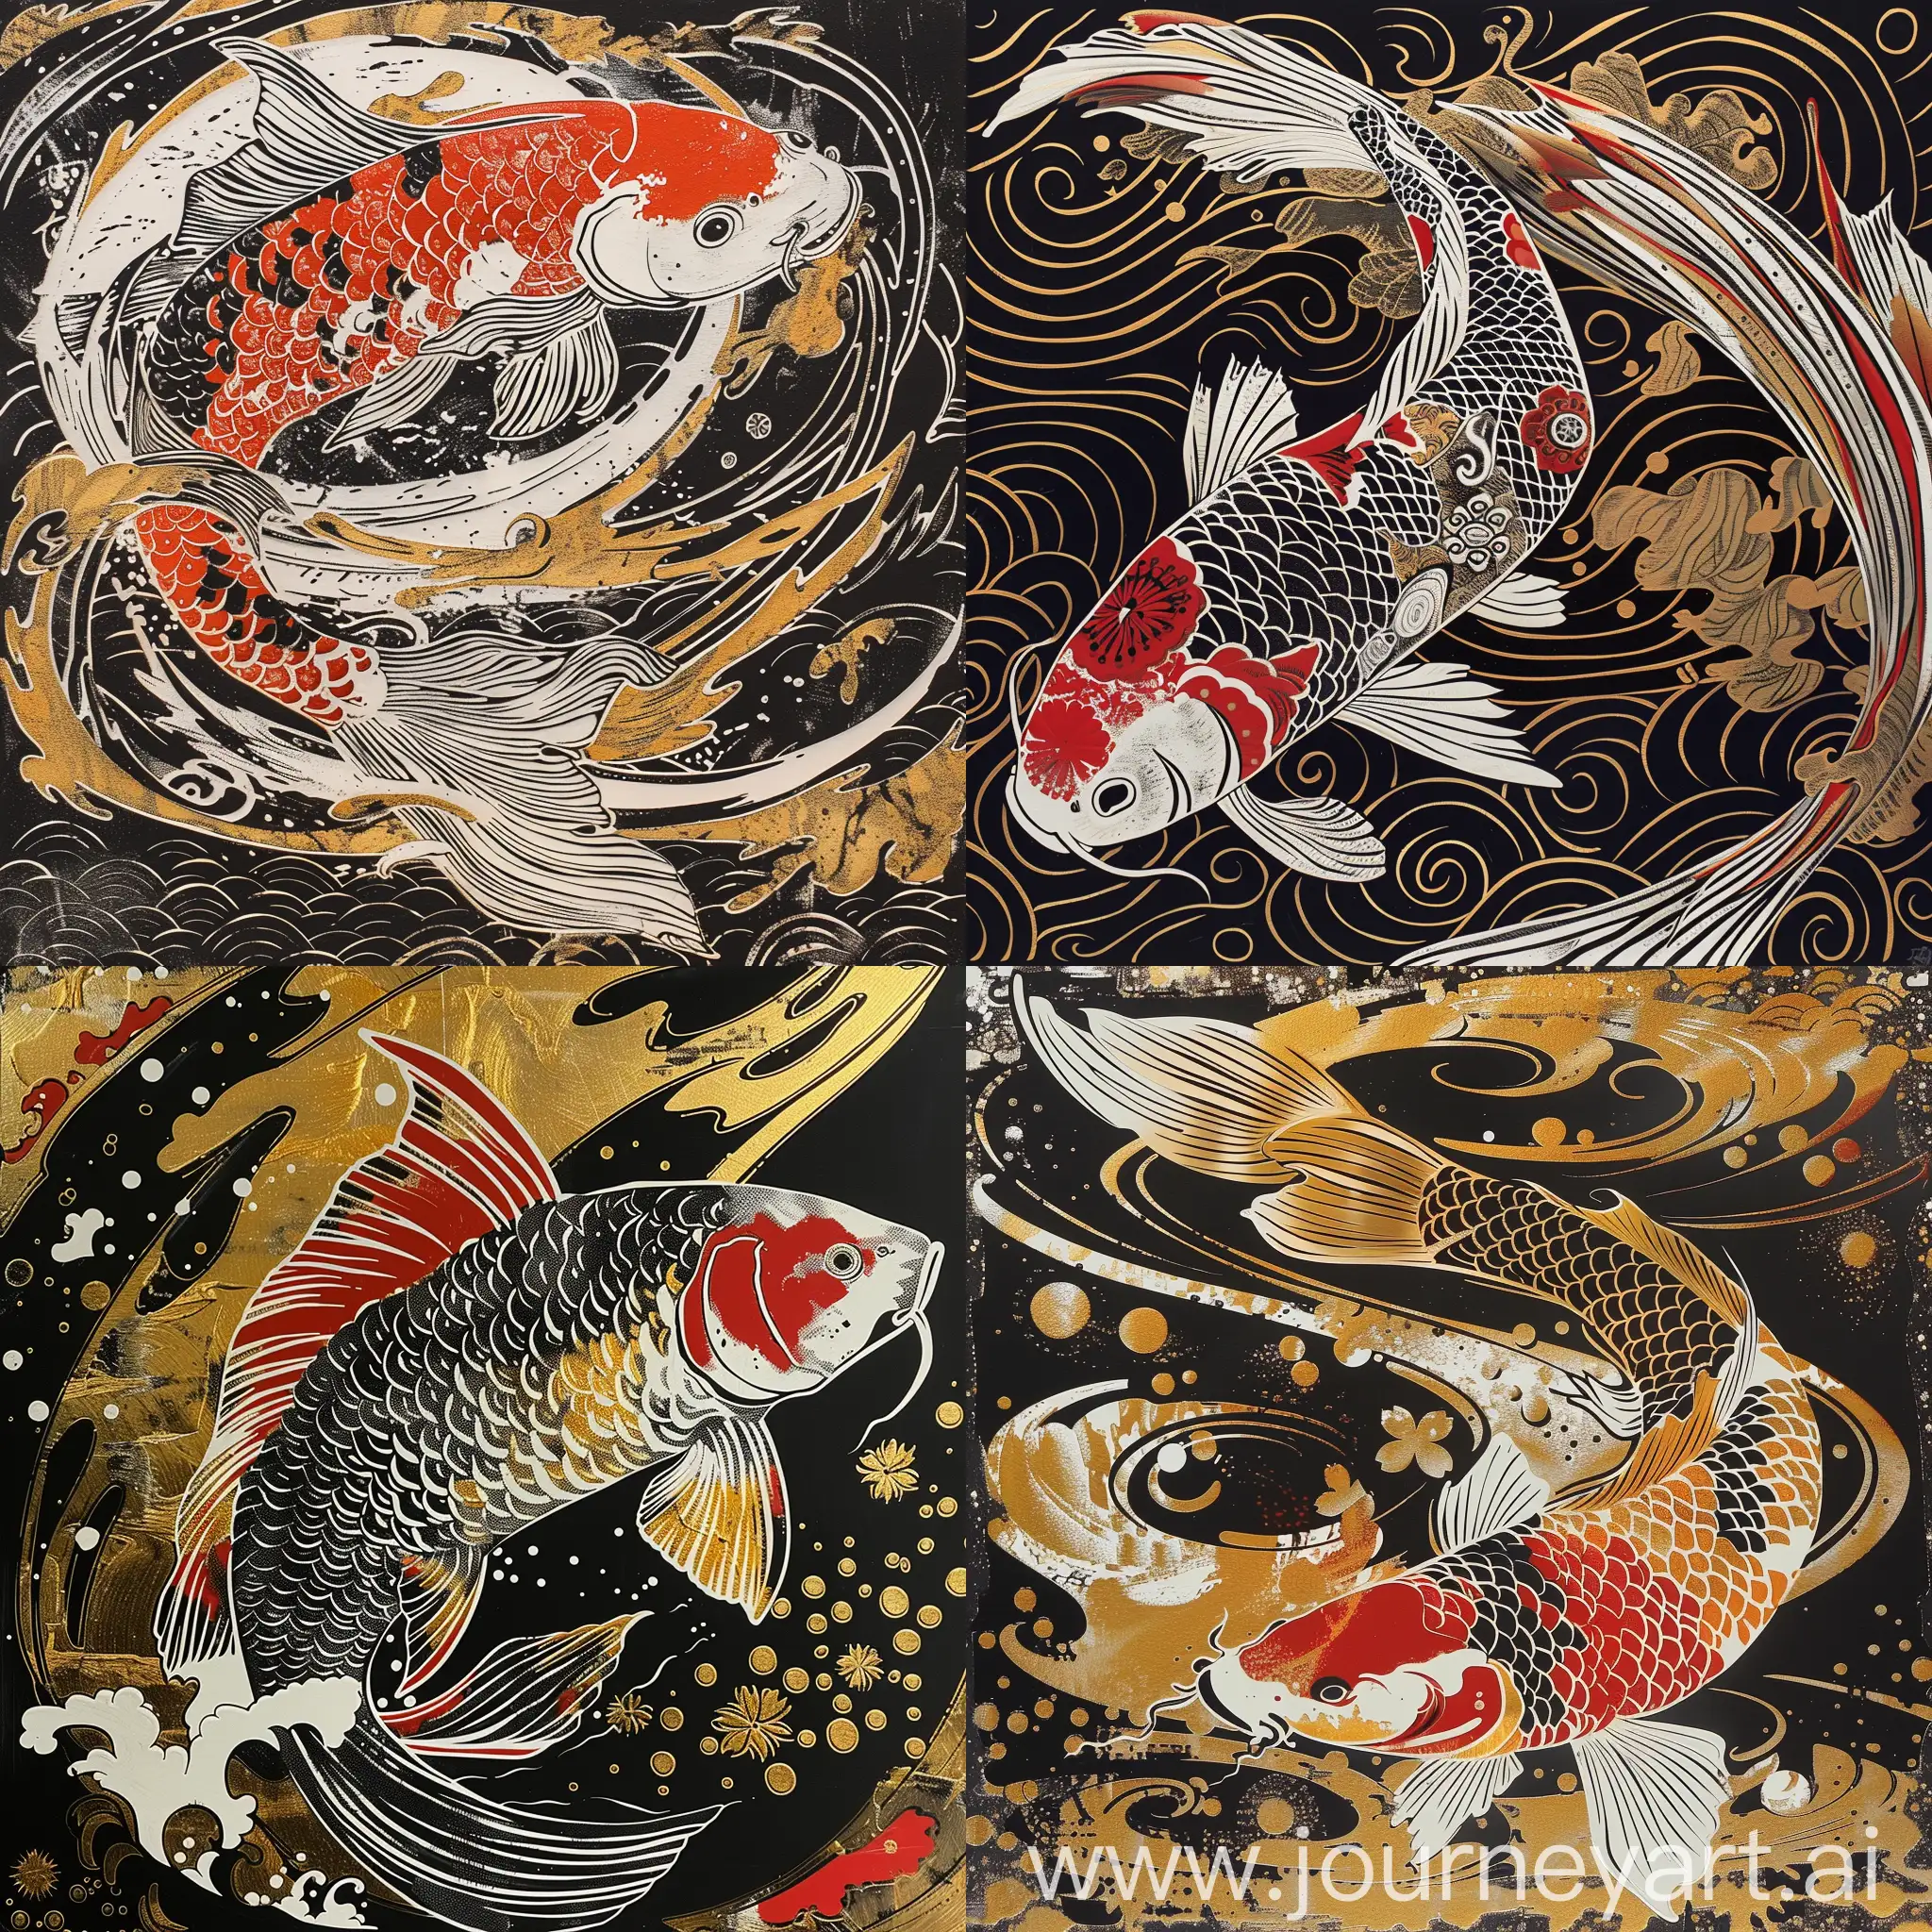 Japanese-Butterfly-Koi-Linocut-Print-with-Ornate-Patterns-in-Black-Gold-White-and-Red